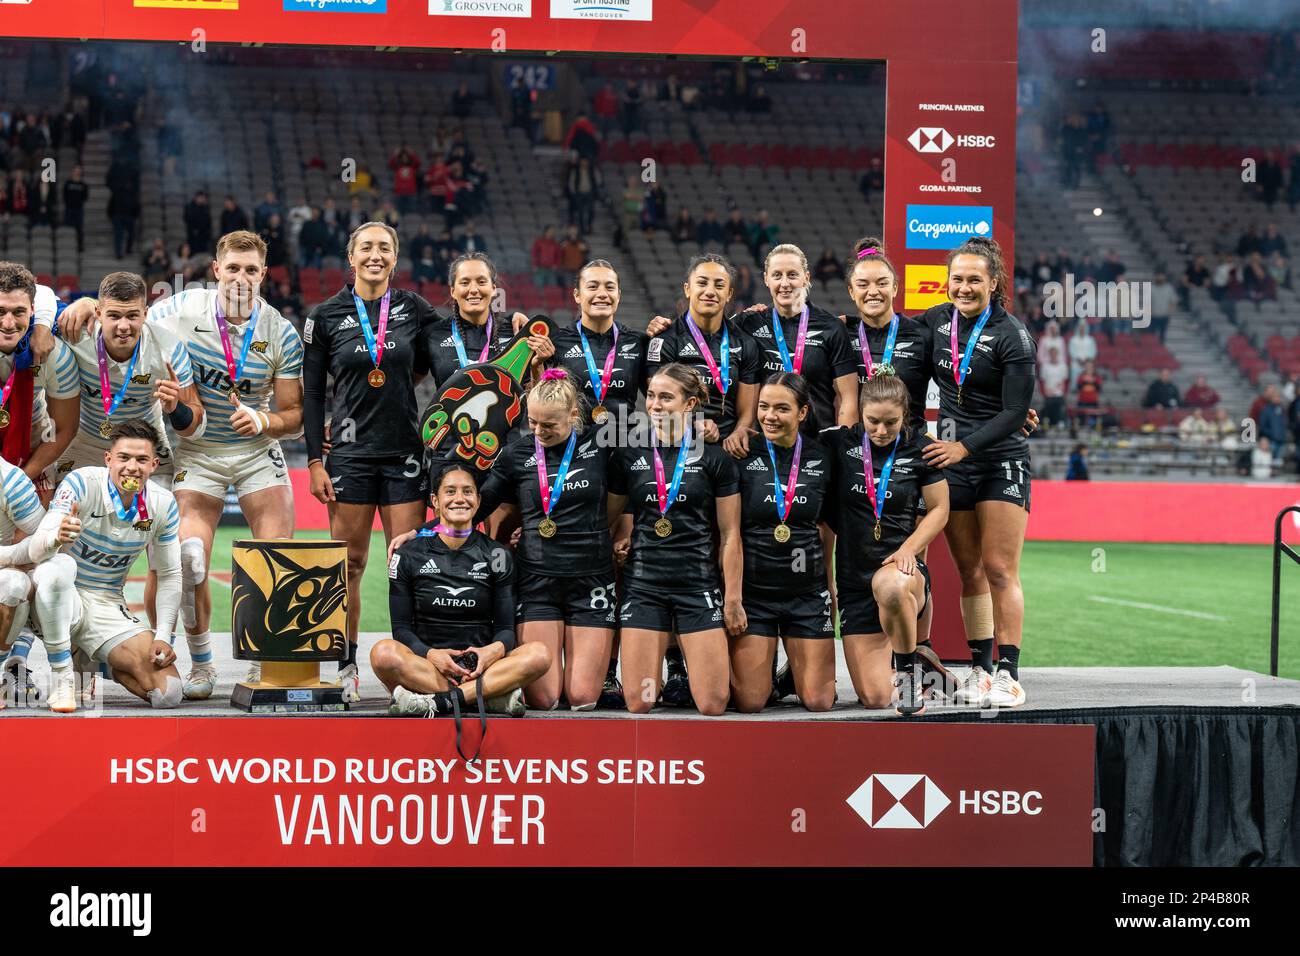 Vancouver, Canada. 5th March, 2023. Womens Gold medallists New Zealand's players pose on the podium during the annual HSBC World Rugby Sevens Series tournament at BC Place in Vancouver, Canada. Credit: Joe Ng/Alamy Live News. Stock Photo